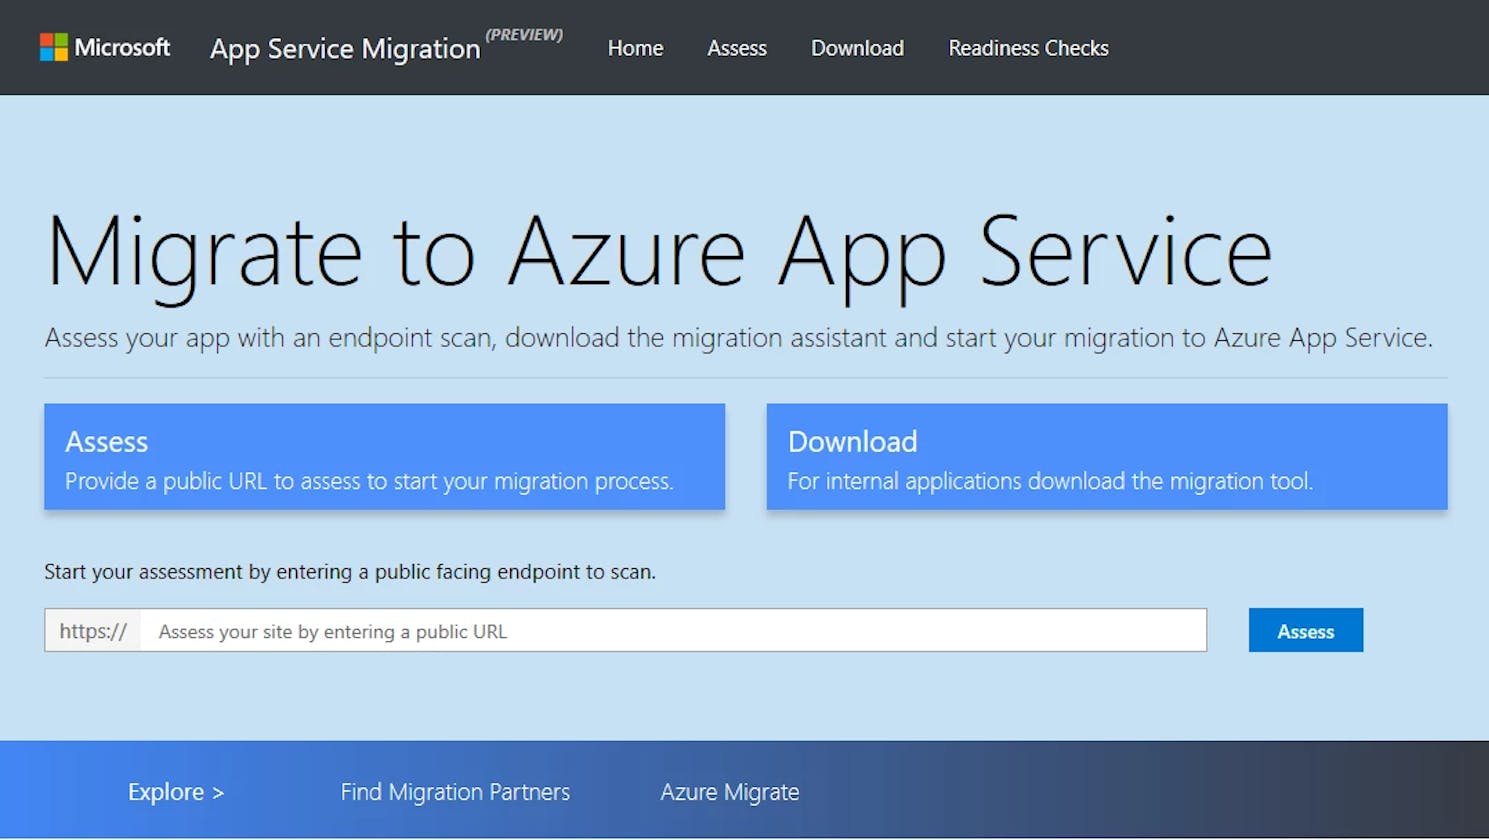 Migrating to the App Service